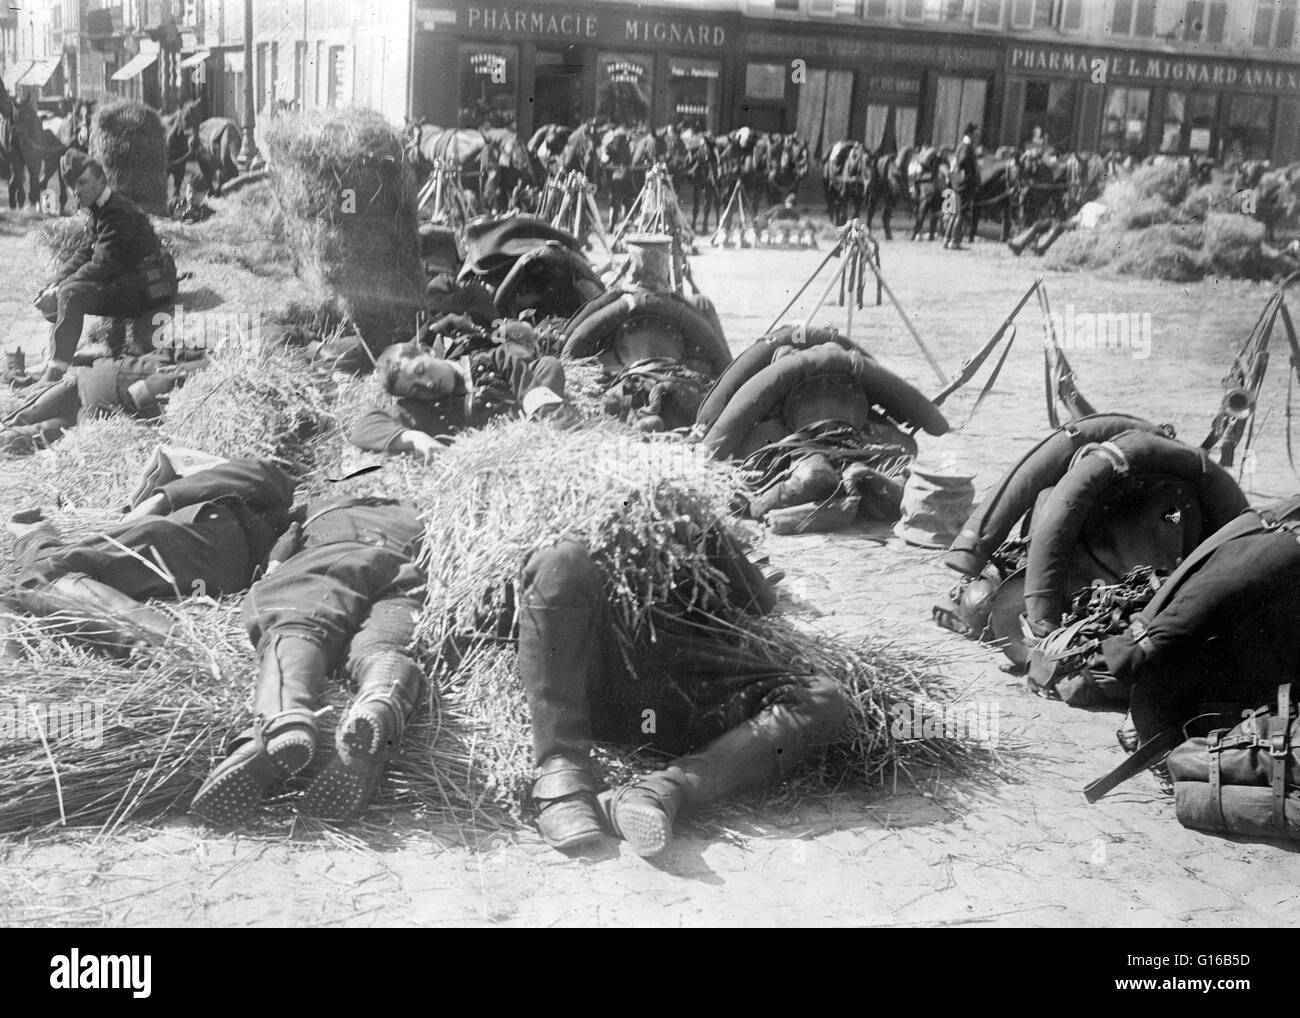 French soldiers resting on the ground in a plaza in front of a pharmacy in France during World War I. In January 1914, the French Army had 47 divisions, composed of 777,000 French soldiers and 47,000 colonial troops. Another 2.9 million men were mobilized Stock Photo